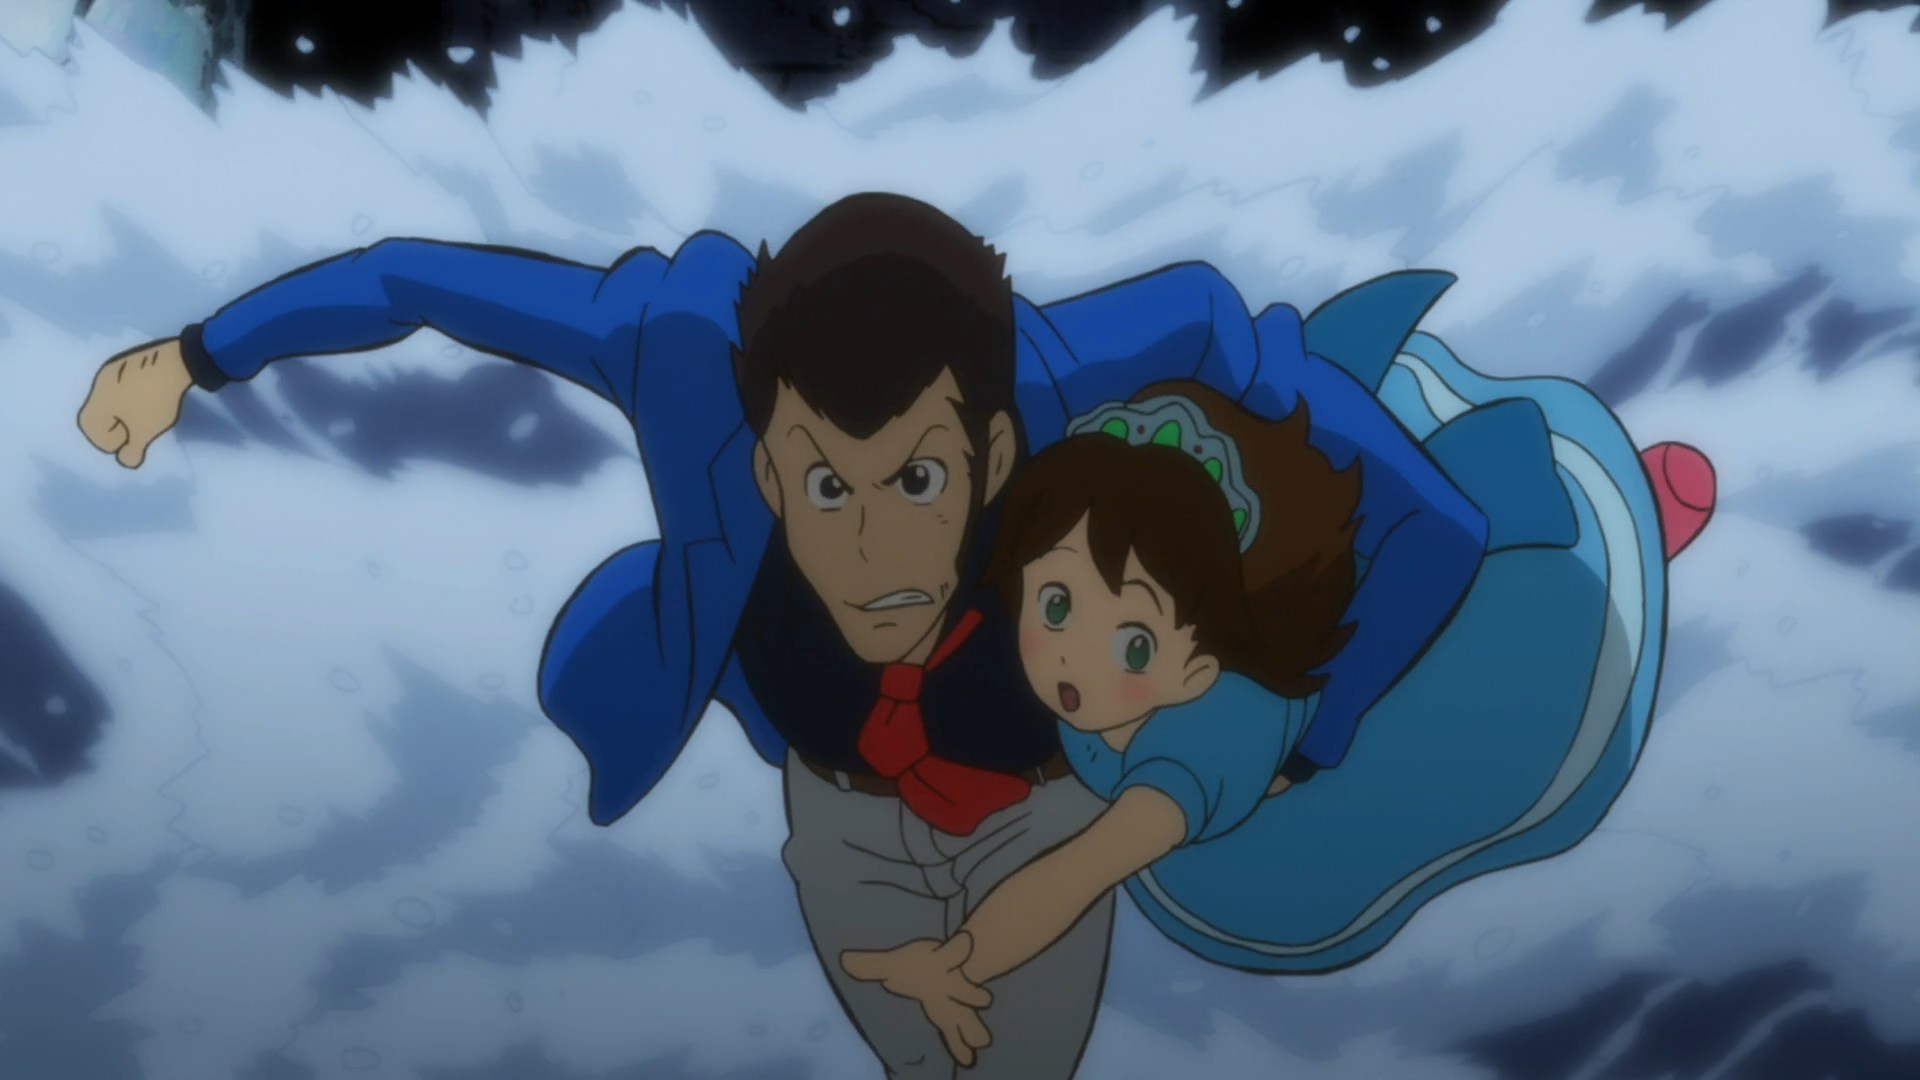 Lupin The Third Part4 08 Review Better Get Another Box Of Tissues Astronerdboy S Anime Manga Blog Astronerdboy S Anime Manga Blog